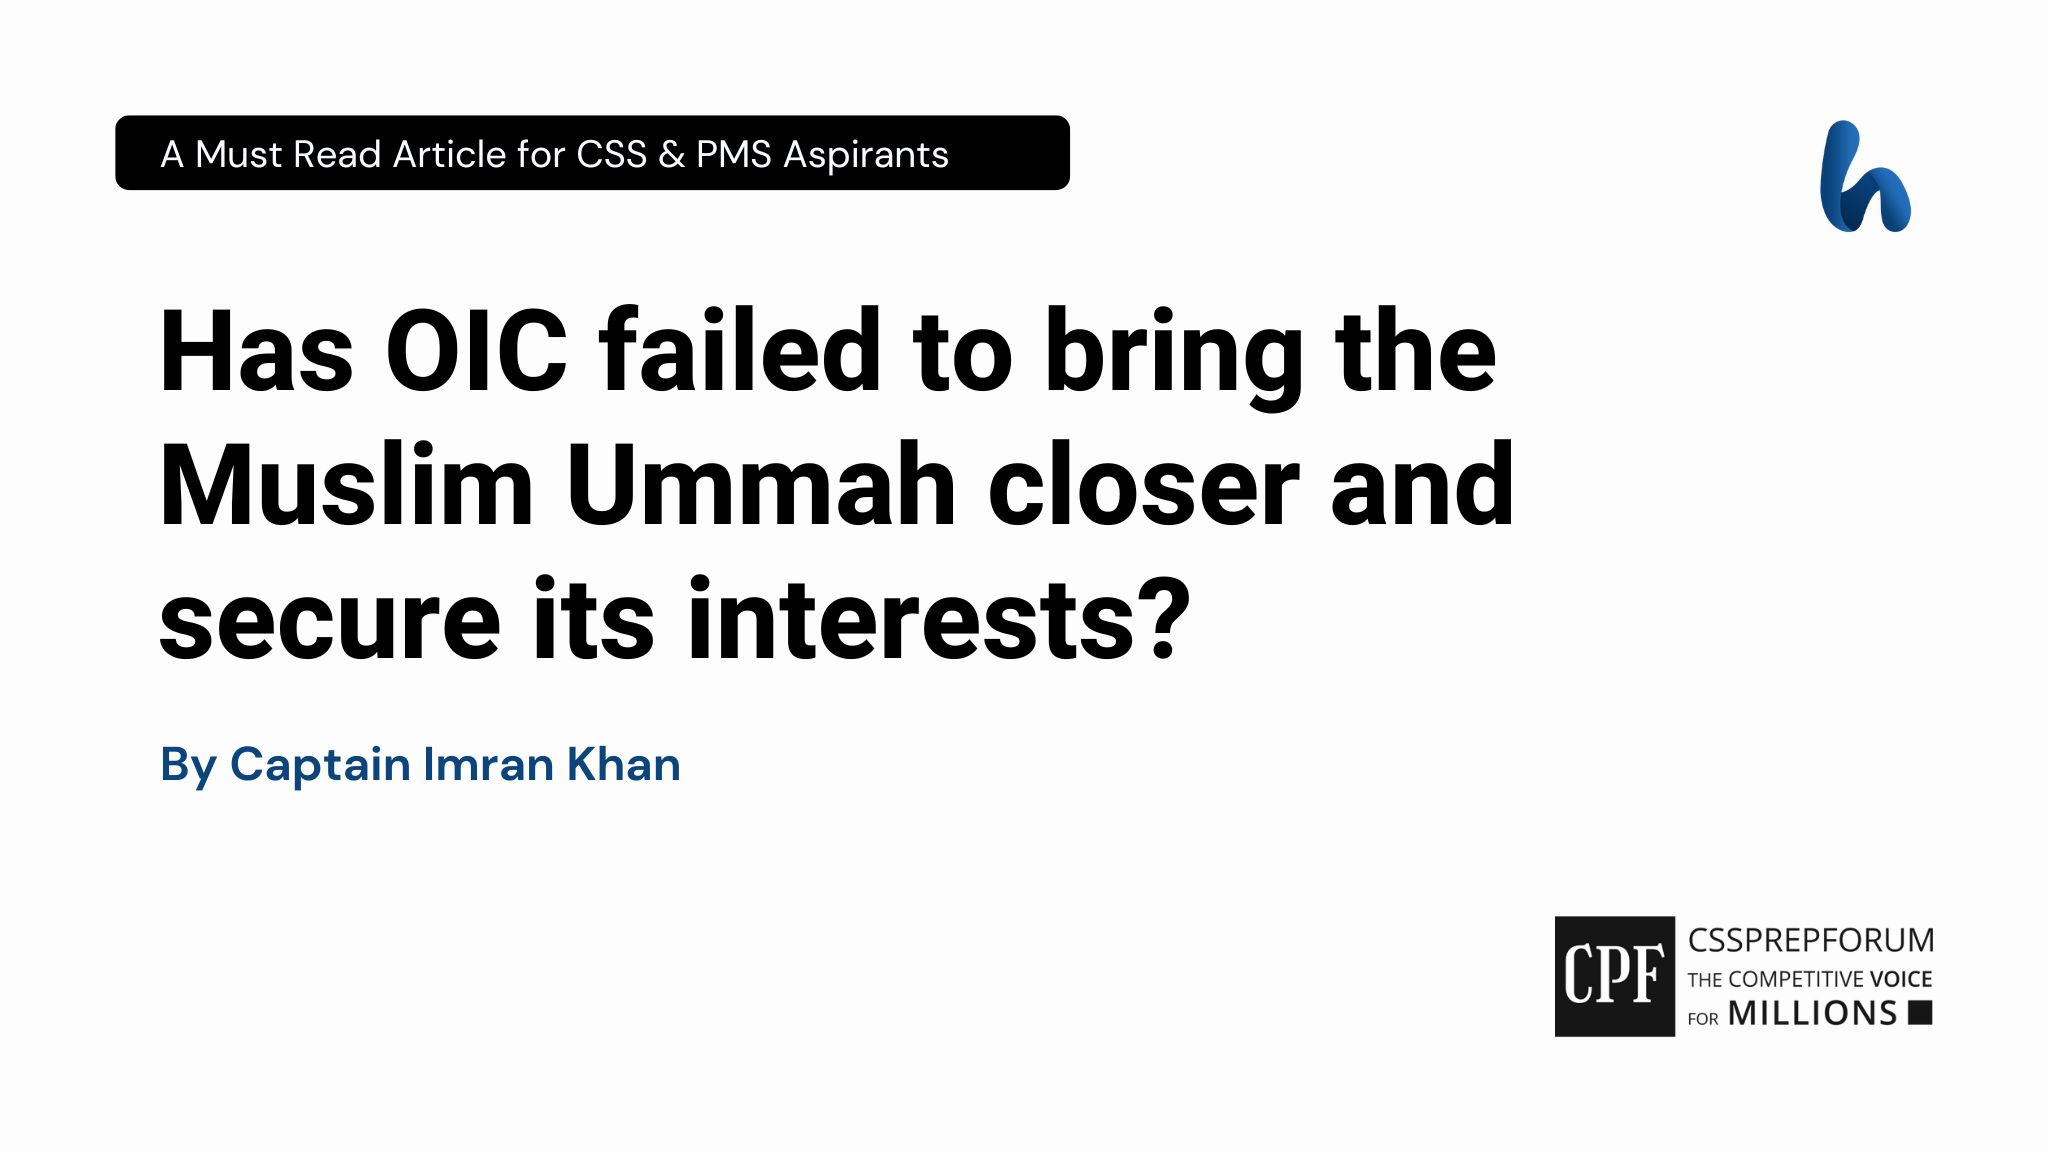 Has OIC failed to bring the Muslim Ummah closer and secure its interests? by Captain Imran Khan